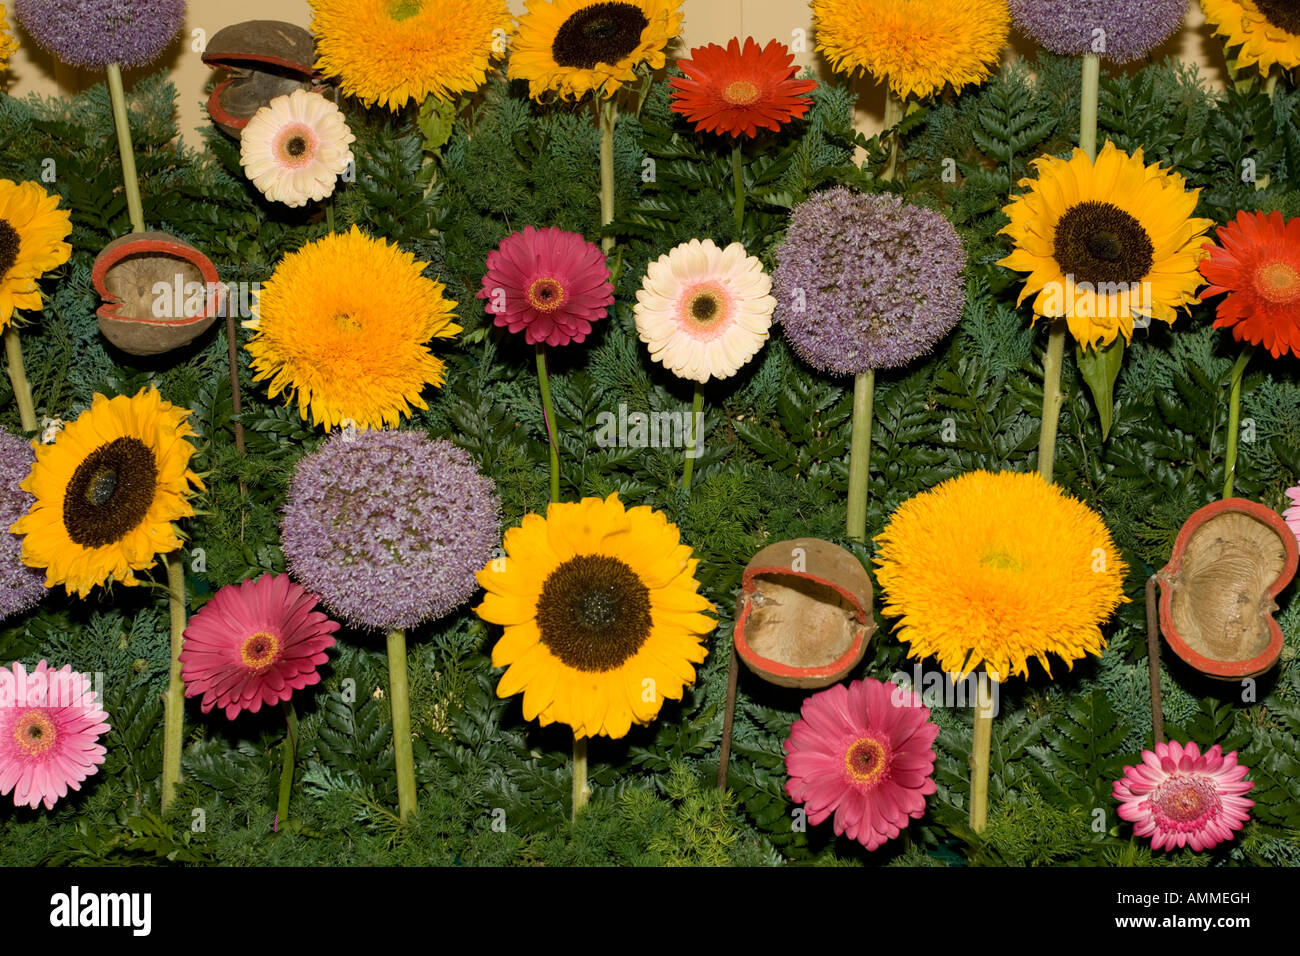 Floral display of sunflower and daisy flower heads against background green ferns UK Stock Photo